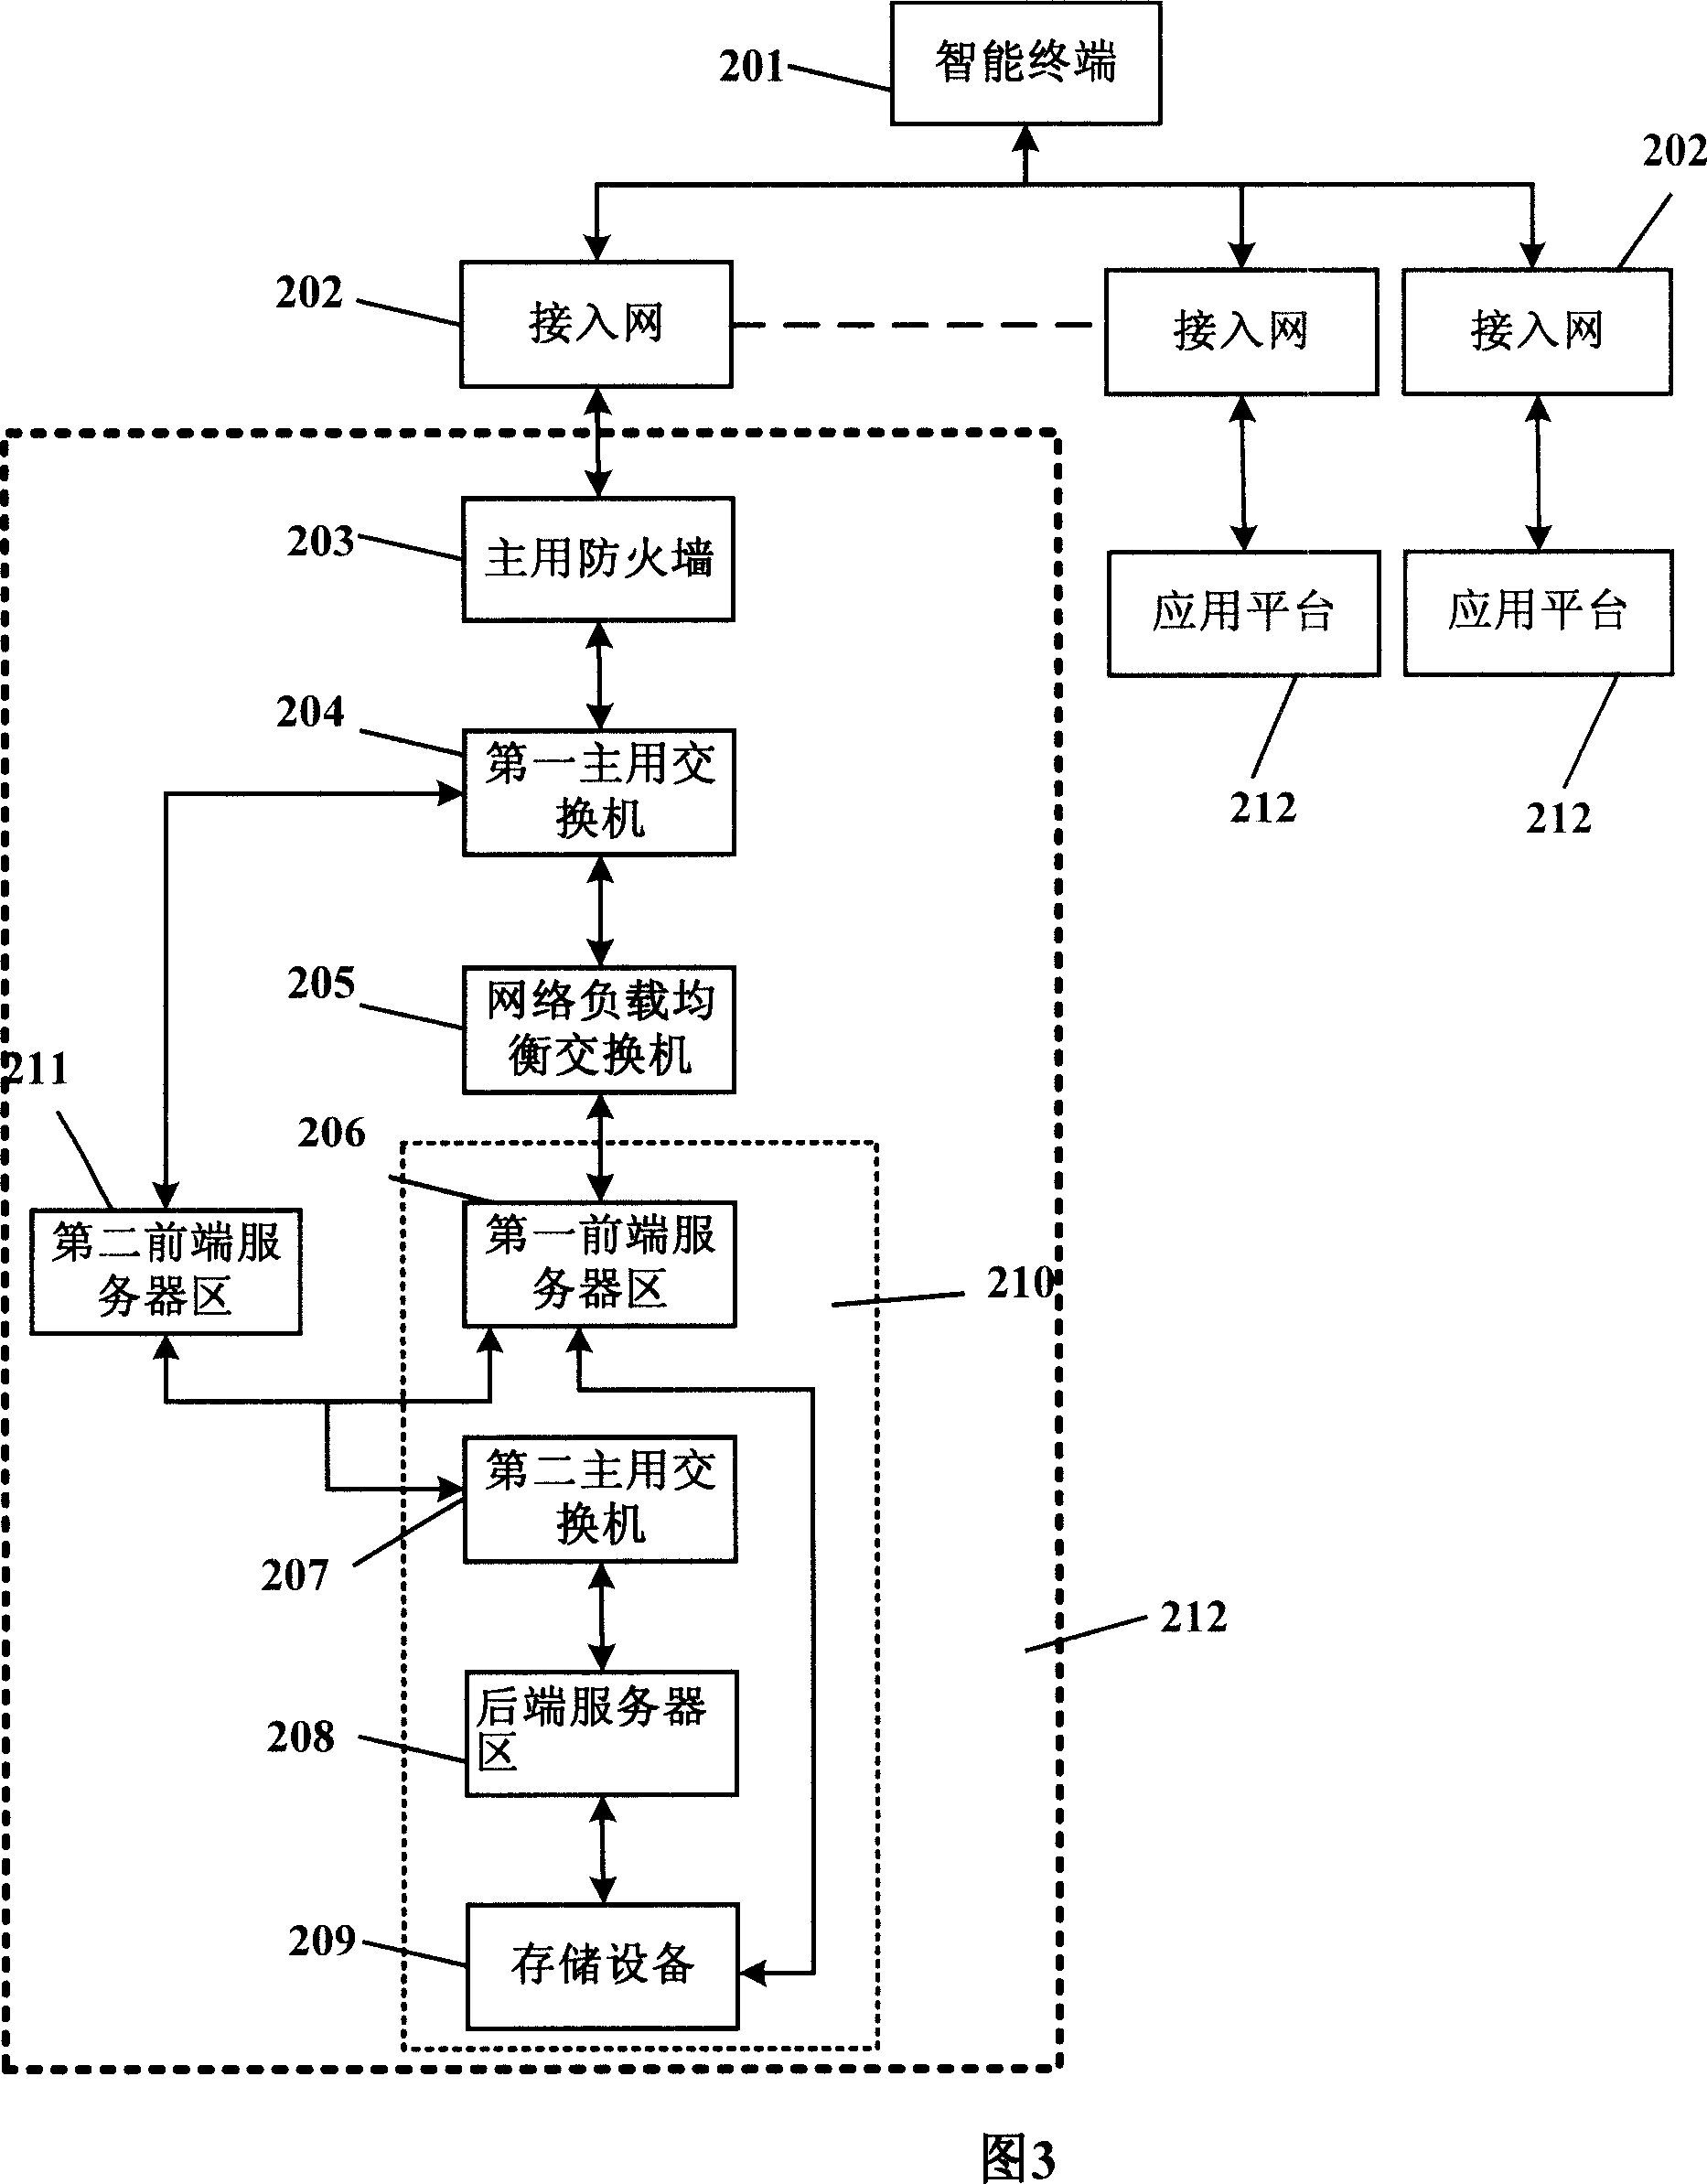 Network structure-based intelligent terminal application system